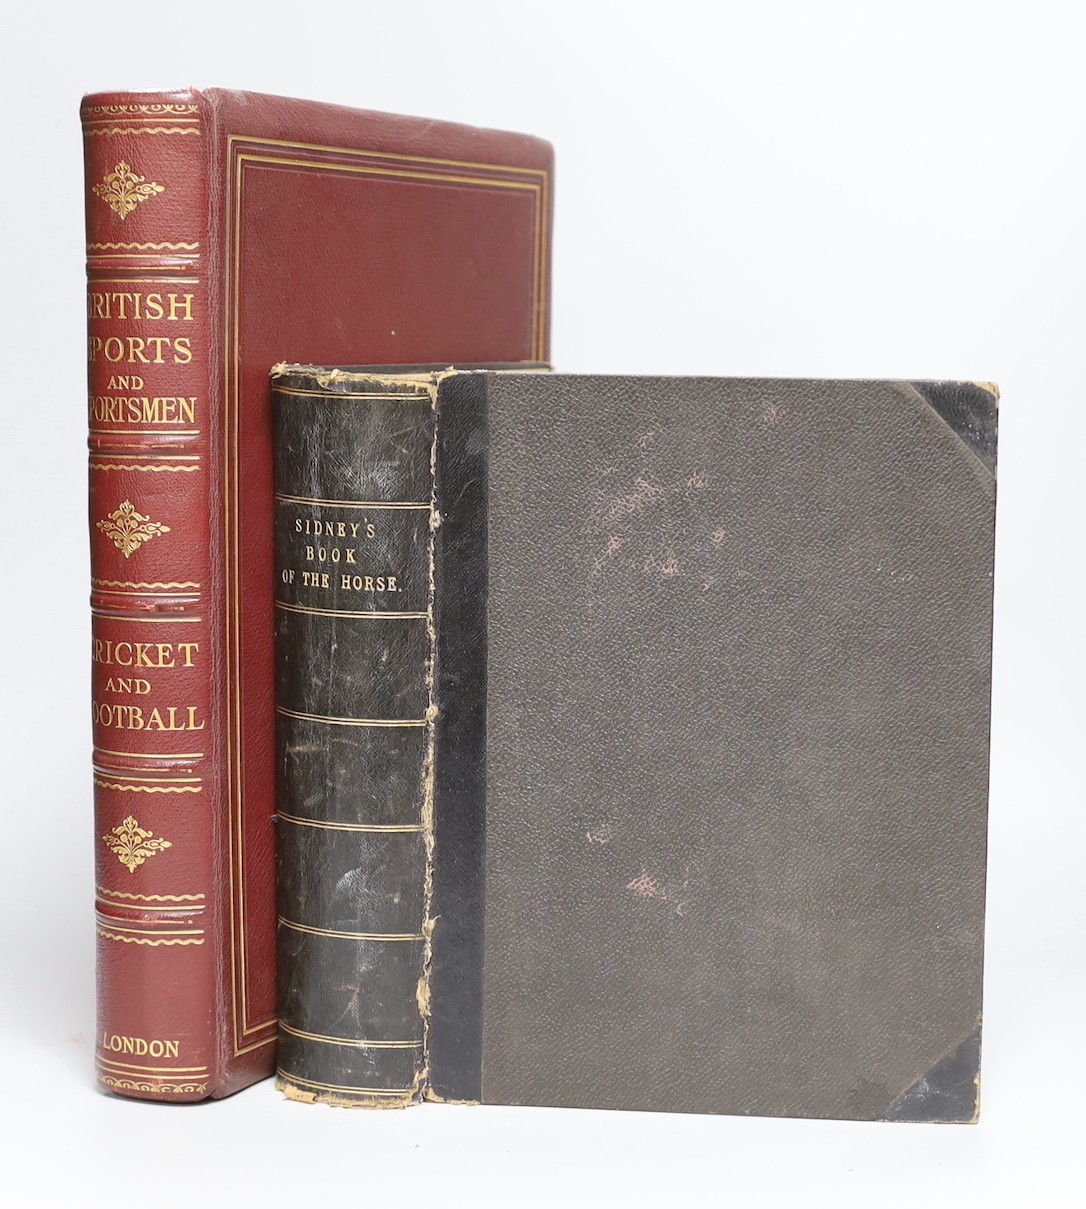 The Sportsman - British Sports and Sportsmen: Cricket and football, one of 1000, folio, red morocco gilt, with tissue-guarded full-page plates, London, 1917 and Sidney, Samuel - The Book of the Horse, 3rd edition, 4to, h